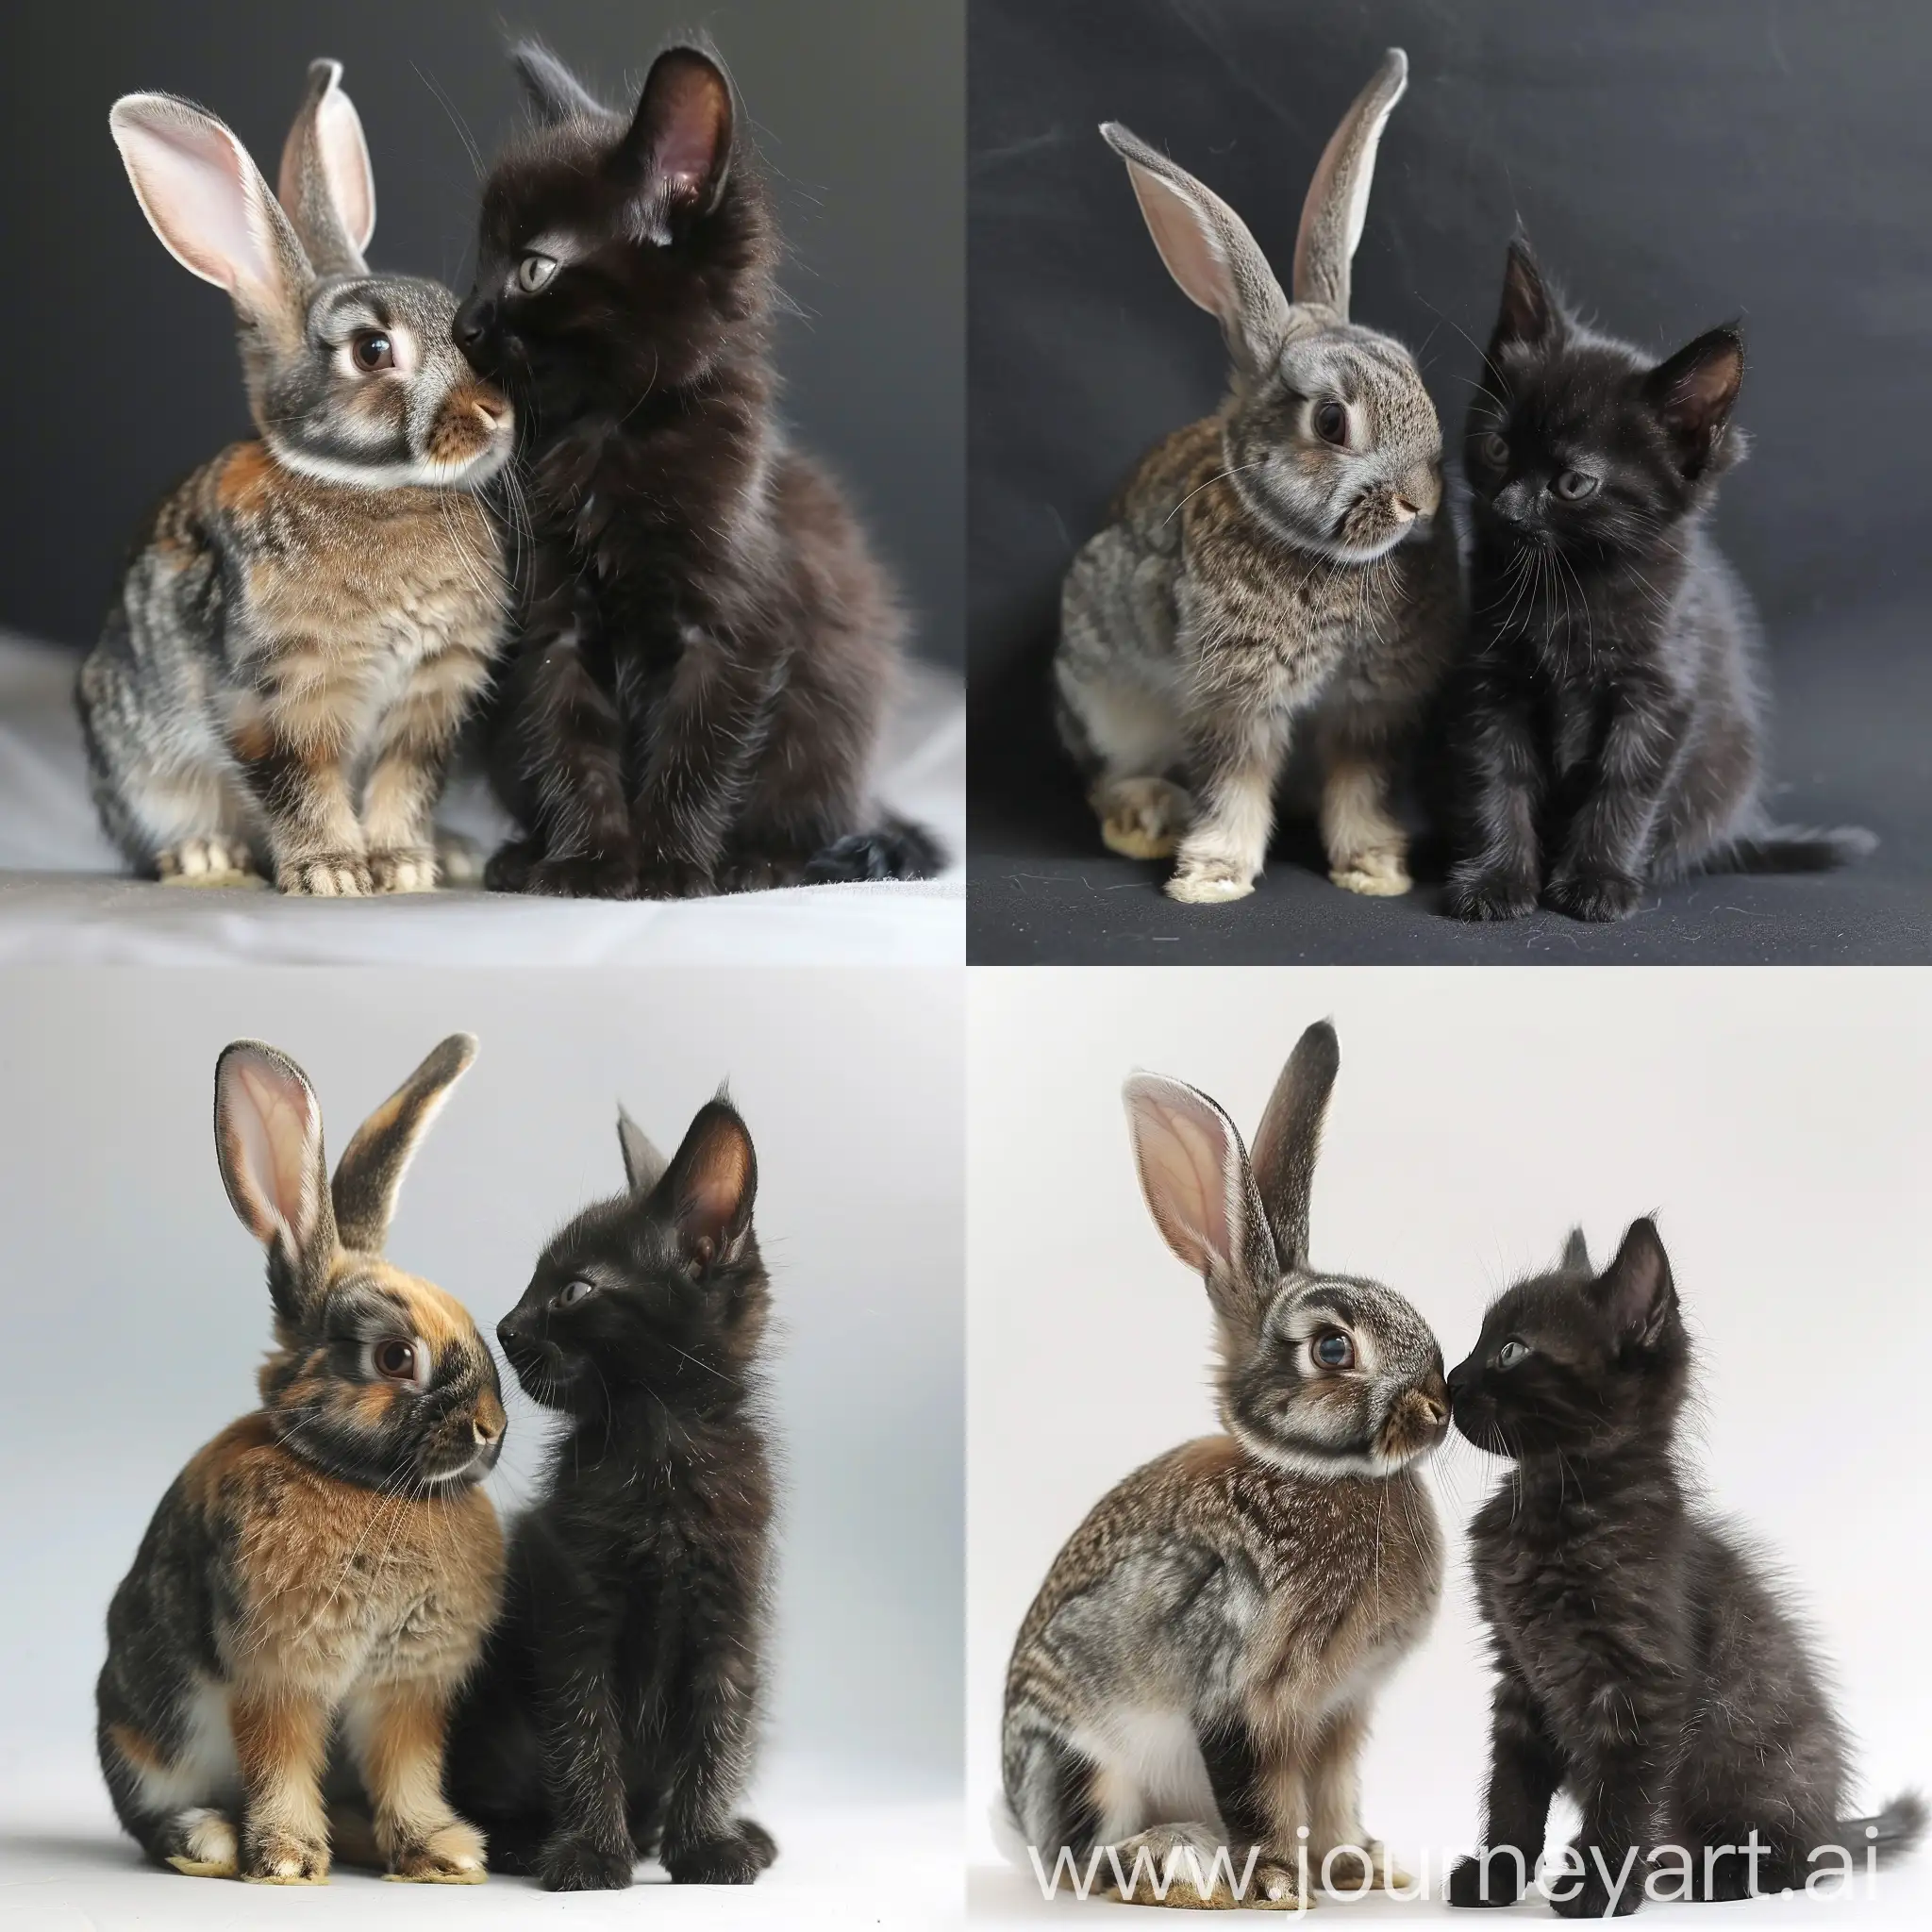 Adorable-Bunny-and-Black-Kitten-Sitting-Together-in-Affectionate-Harmony